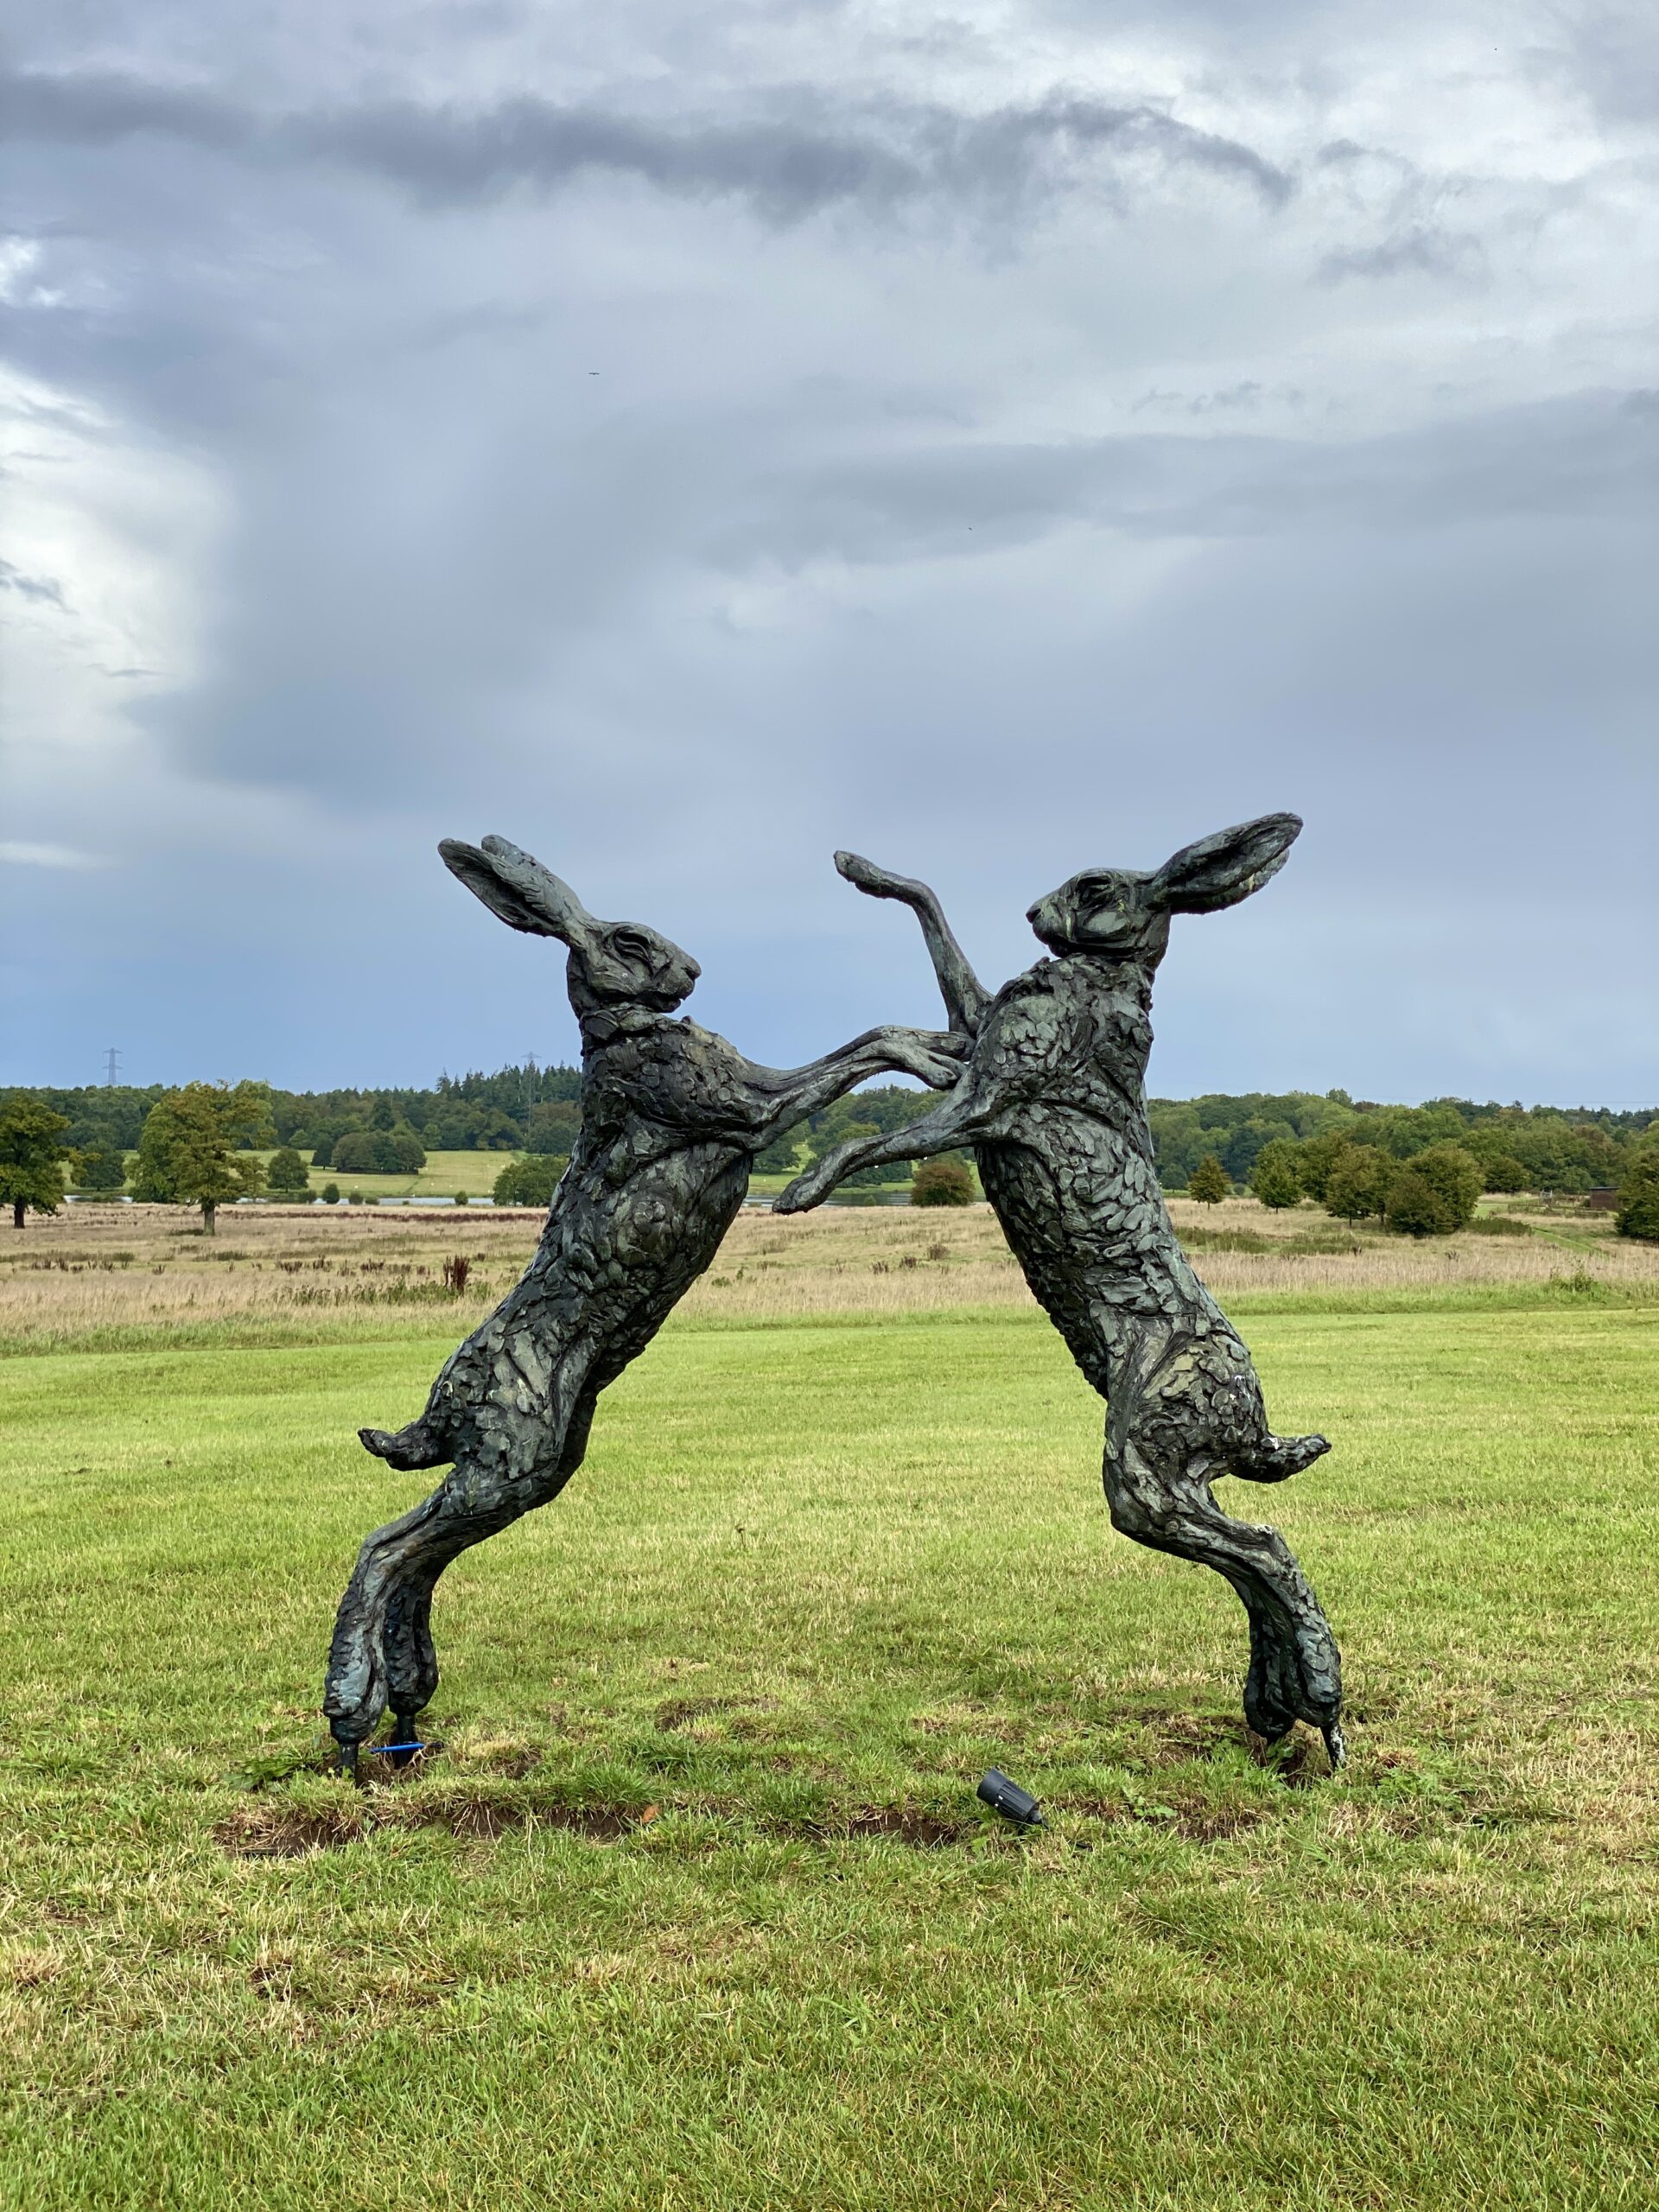 Monumental Boxing Hares from The Sculpture Park at Four Seasons Hotel